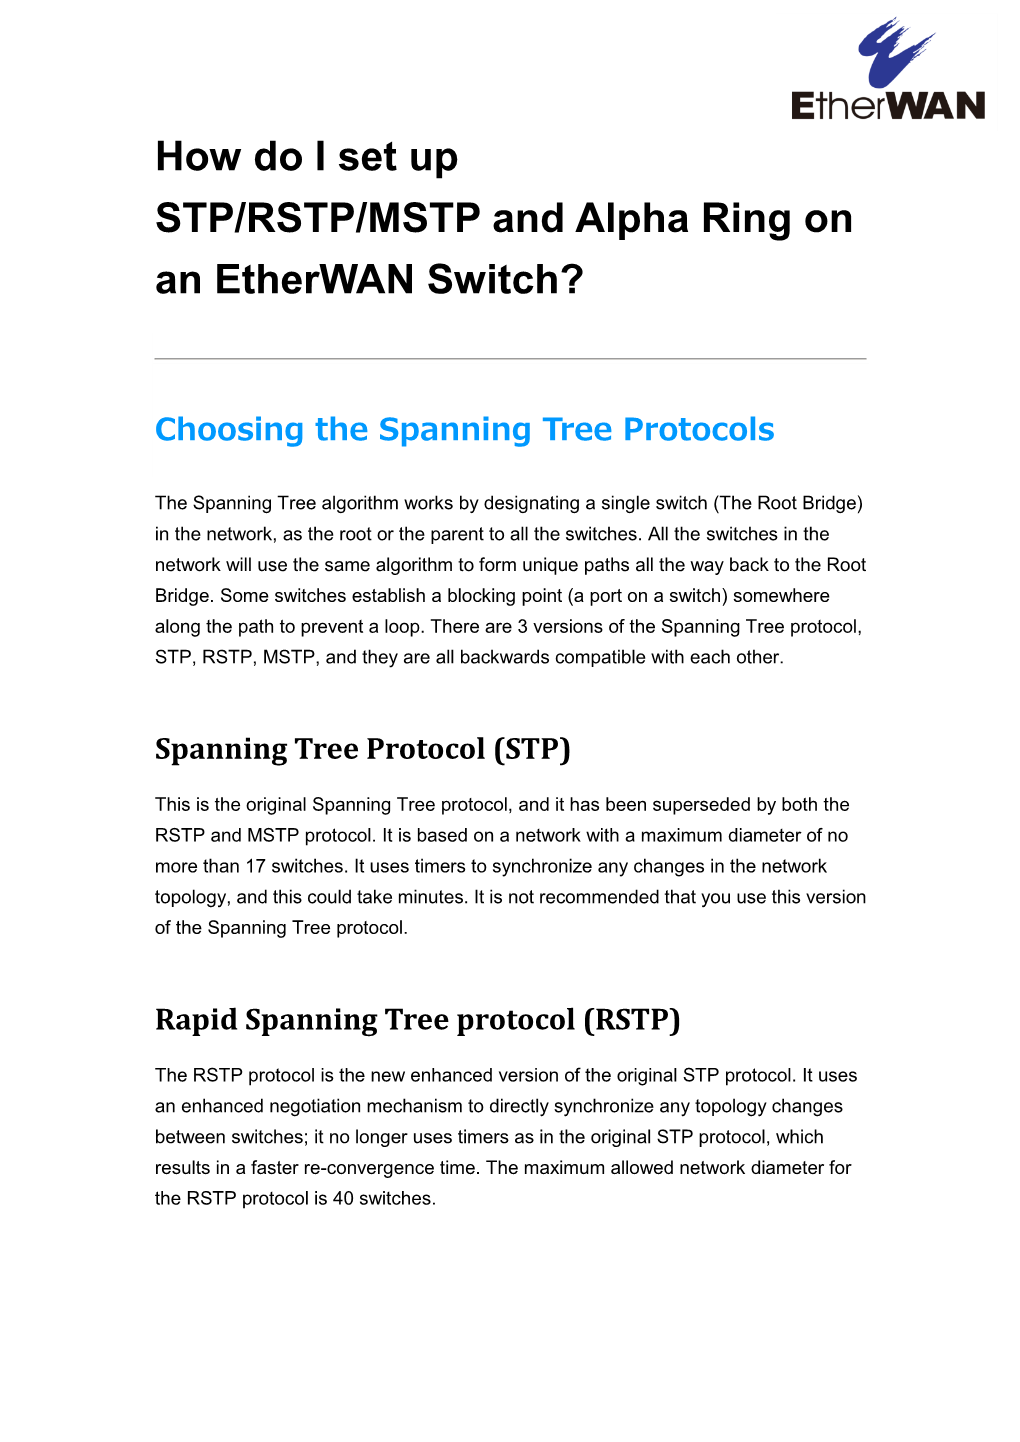 How Do I Set up STP/RSTP/MSTP and Alpha Ring on an Etherwan Switch?